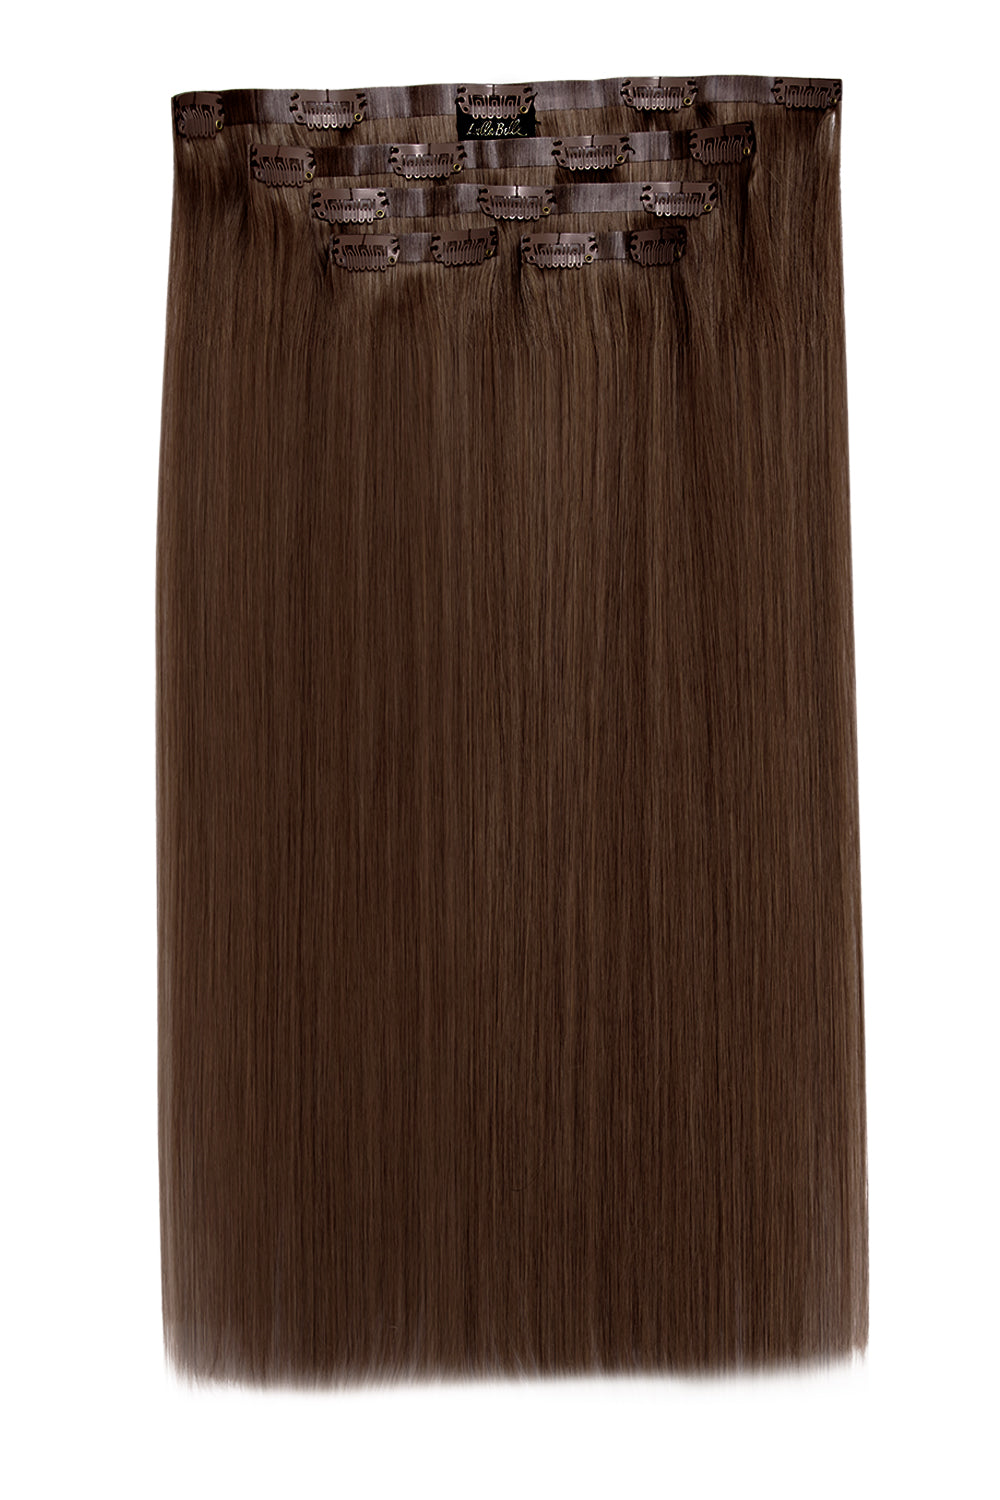 Luxury Gold 20" 5 Piece Human Hair Extensions  - Chestnut